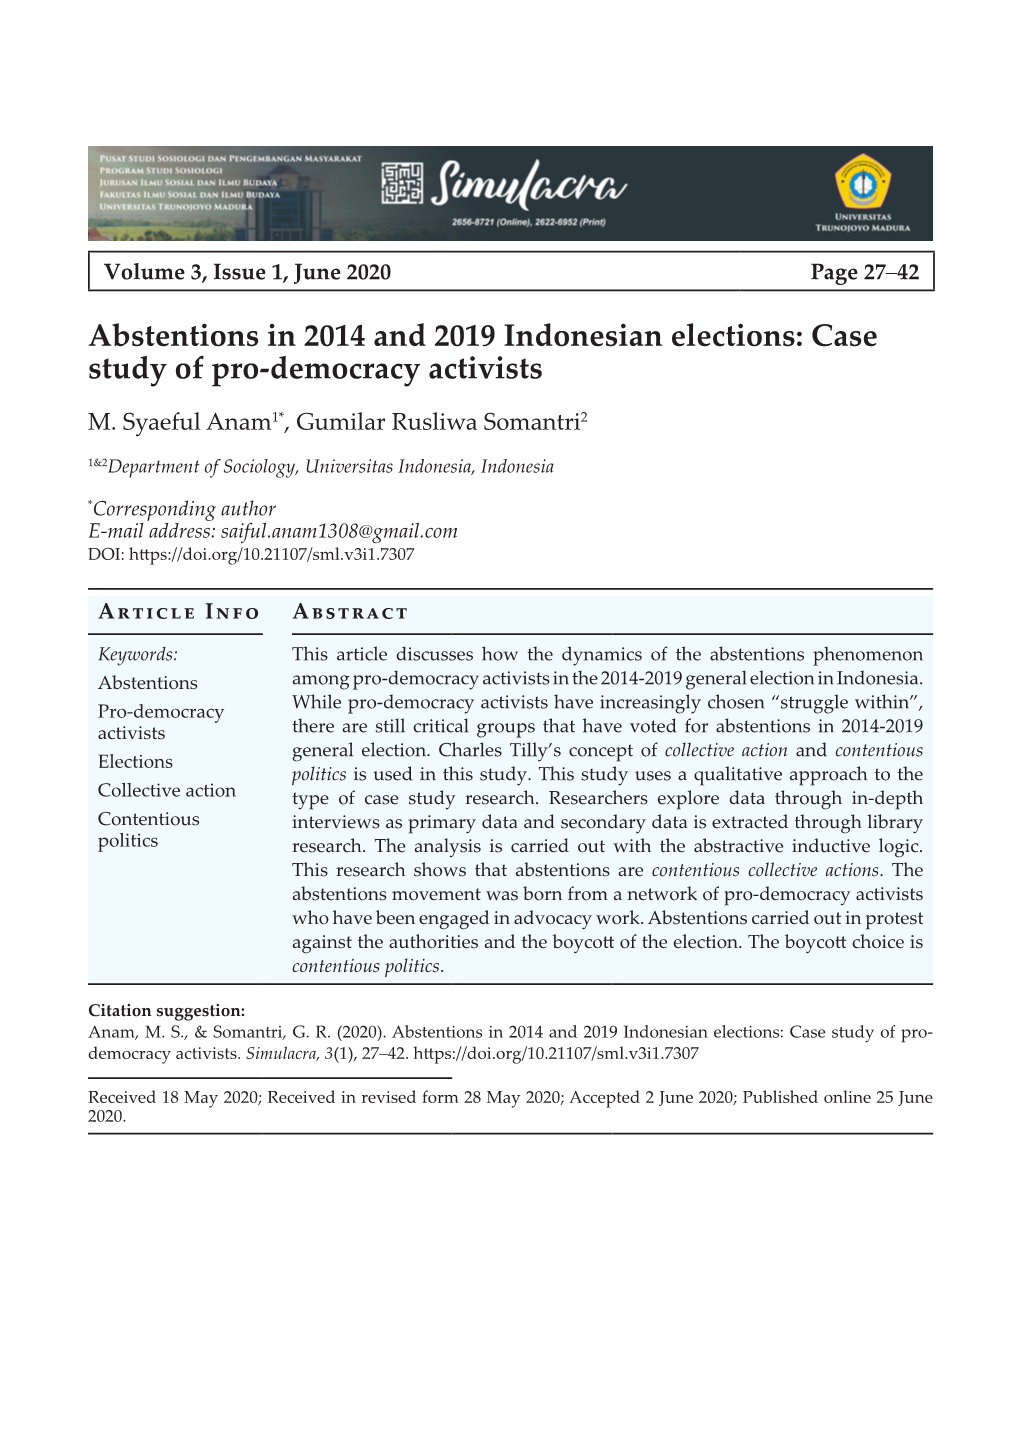 Abstentions in 2014 and 2019 Indonesian Elections: Case Study of Pro-Democracy Activists